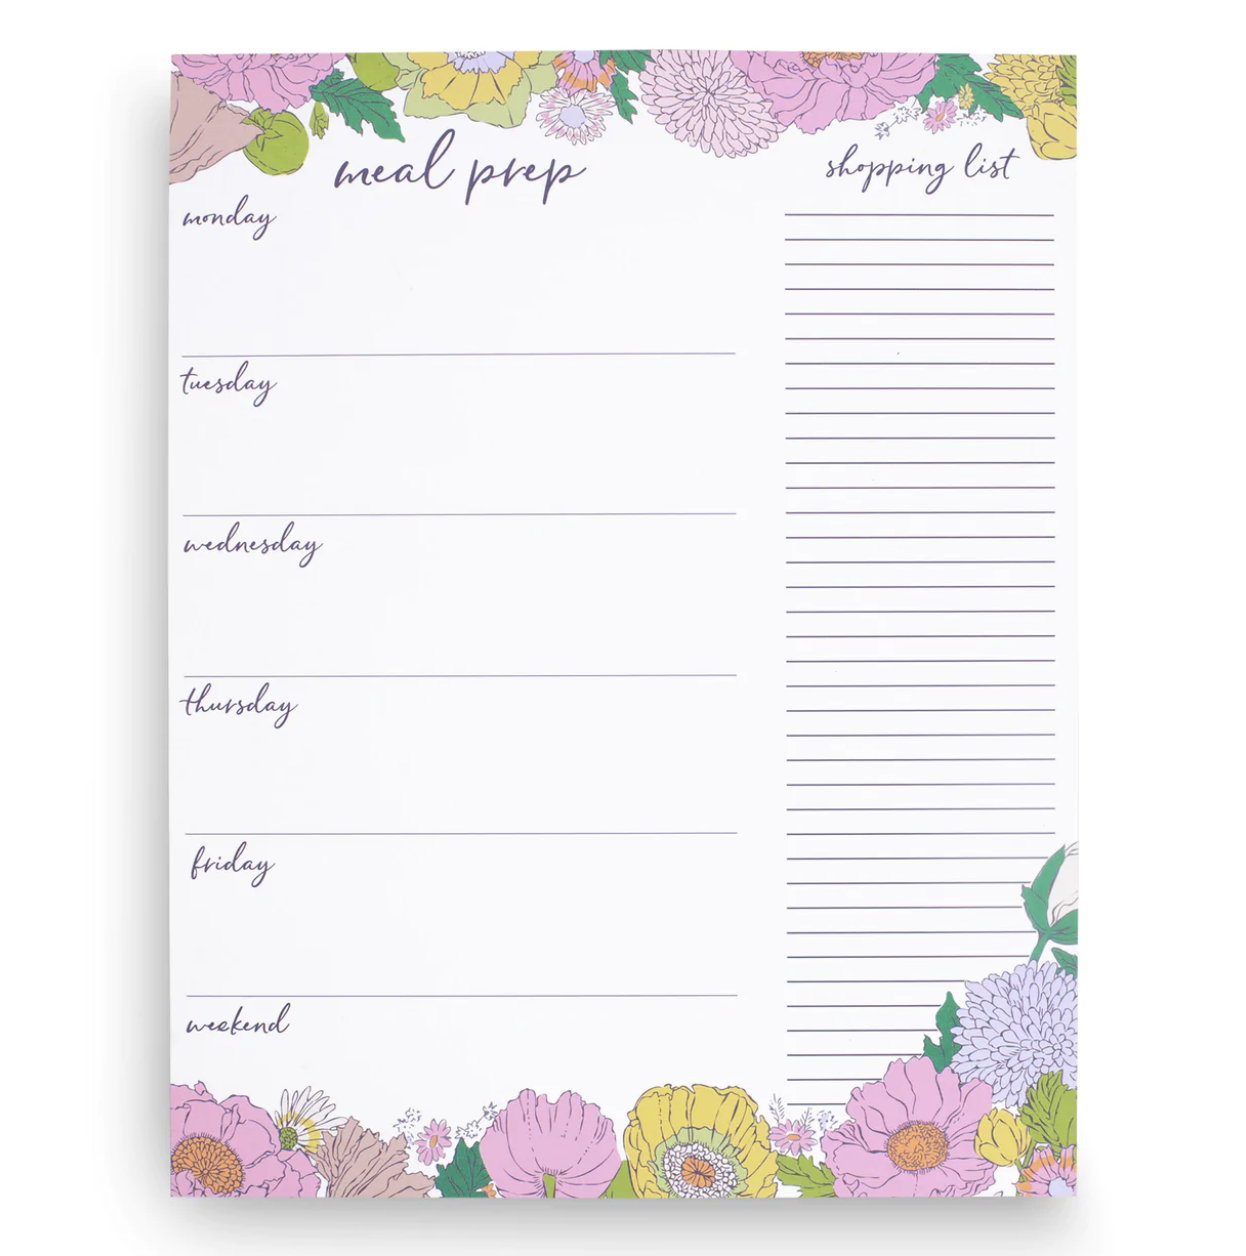 Meal Planner Notepad